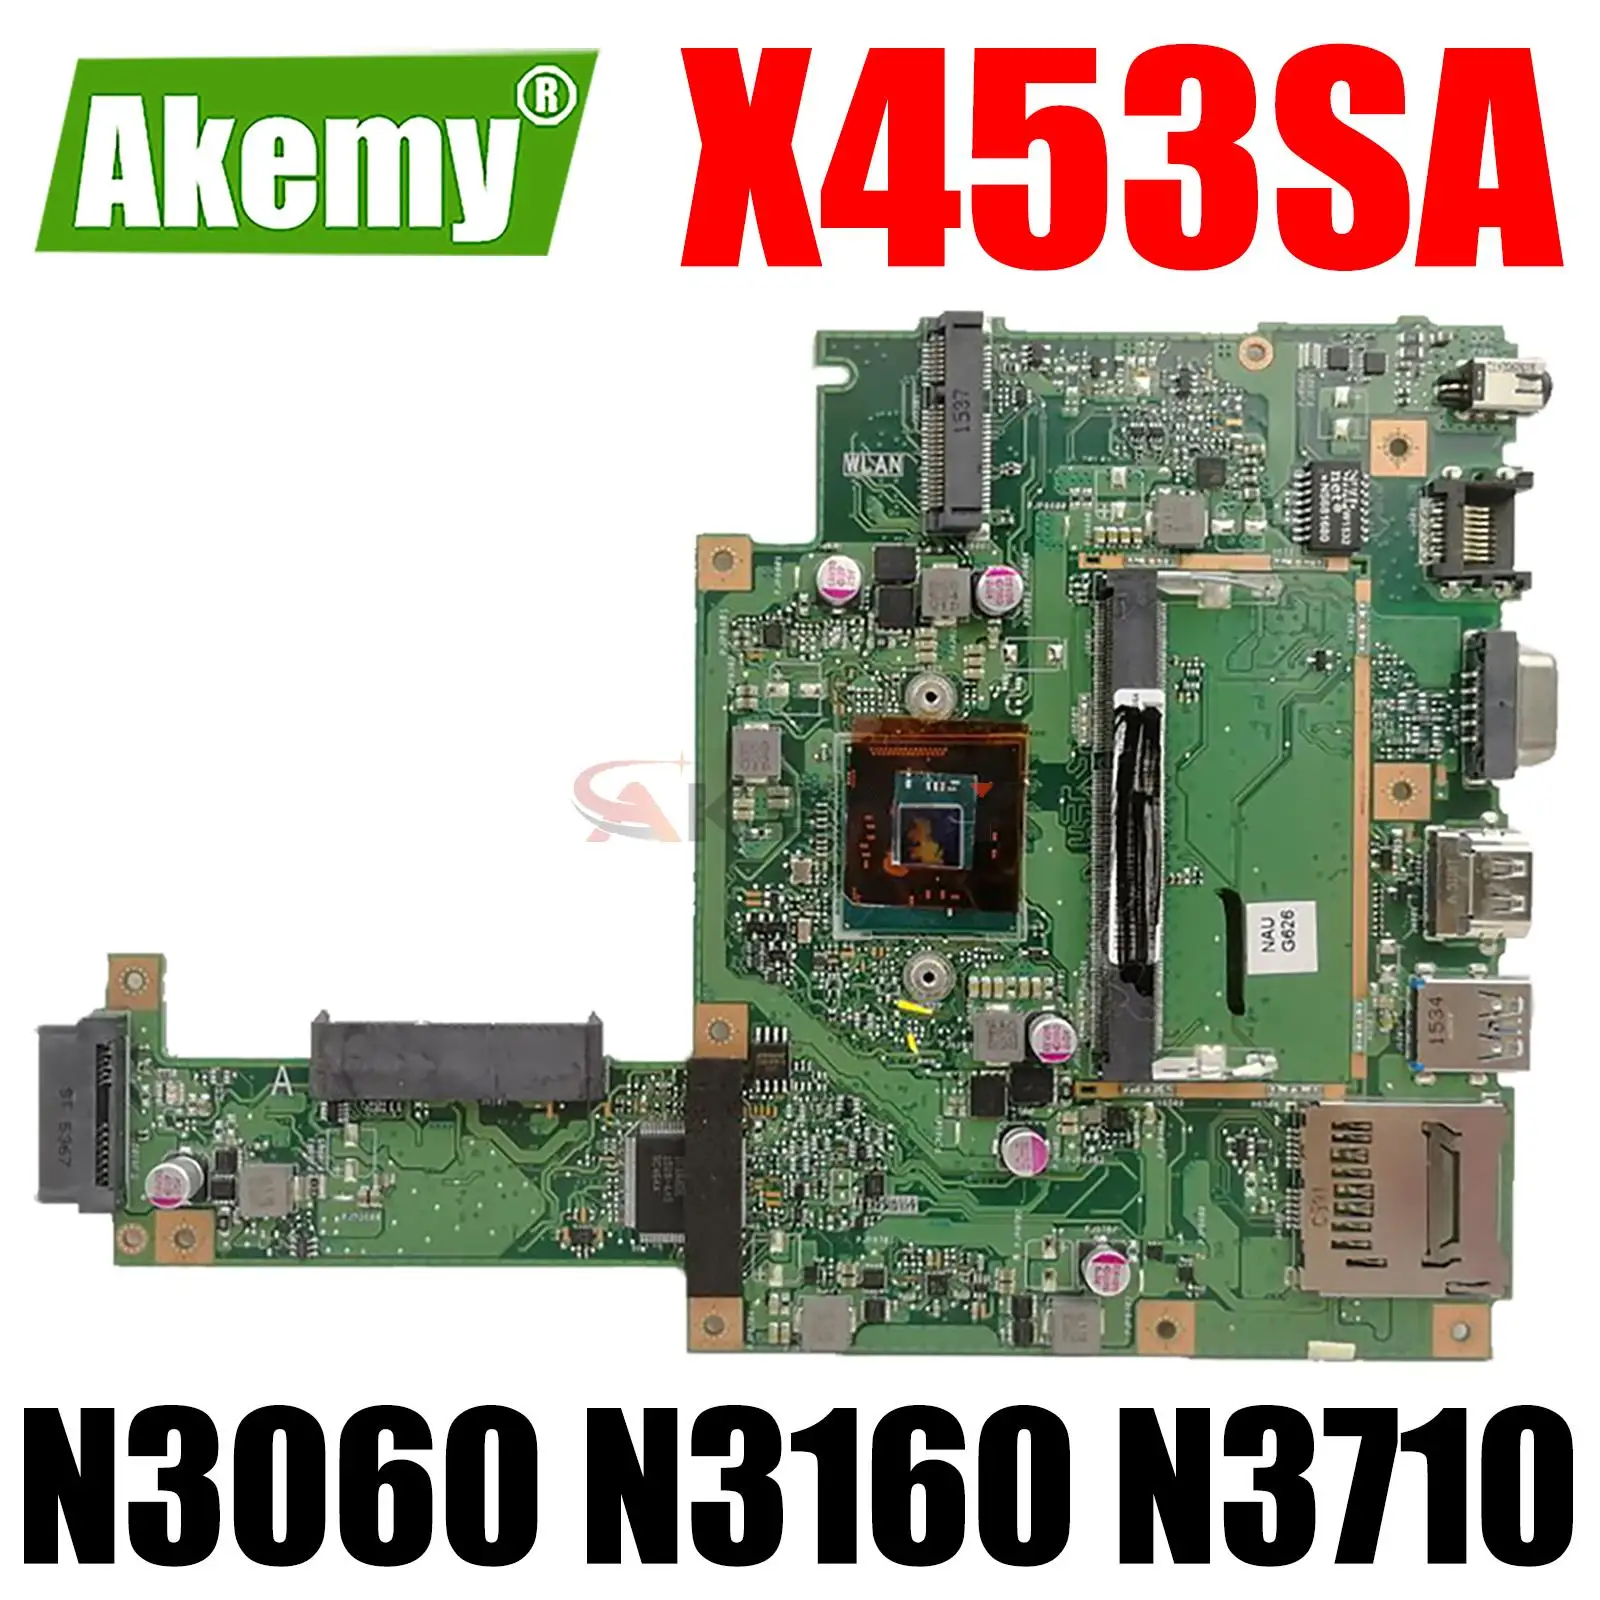 

X453SA Laptop Motherboard W/ N3050 N3060 N3150 N3160 N3700 N3710 CPU for ASUS X453S X453 F453S Notebook Motherboard Mainboard